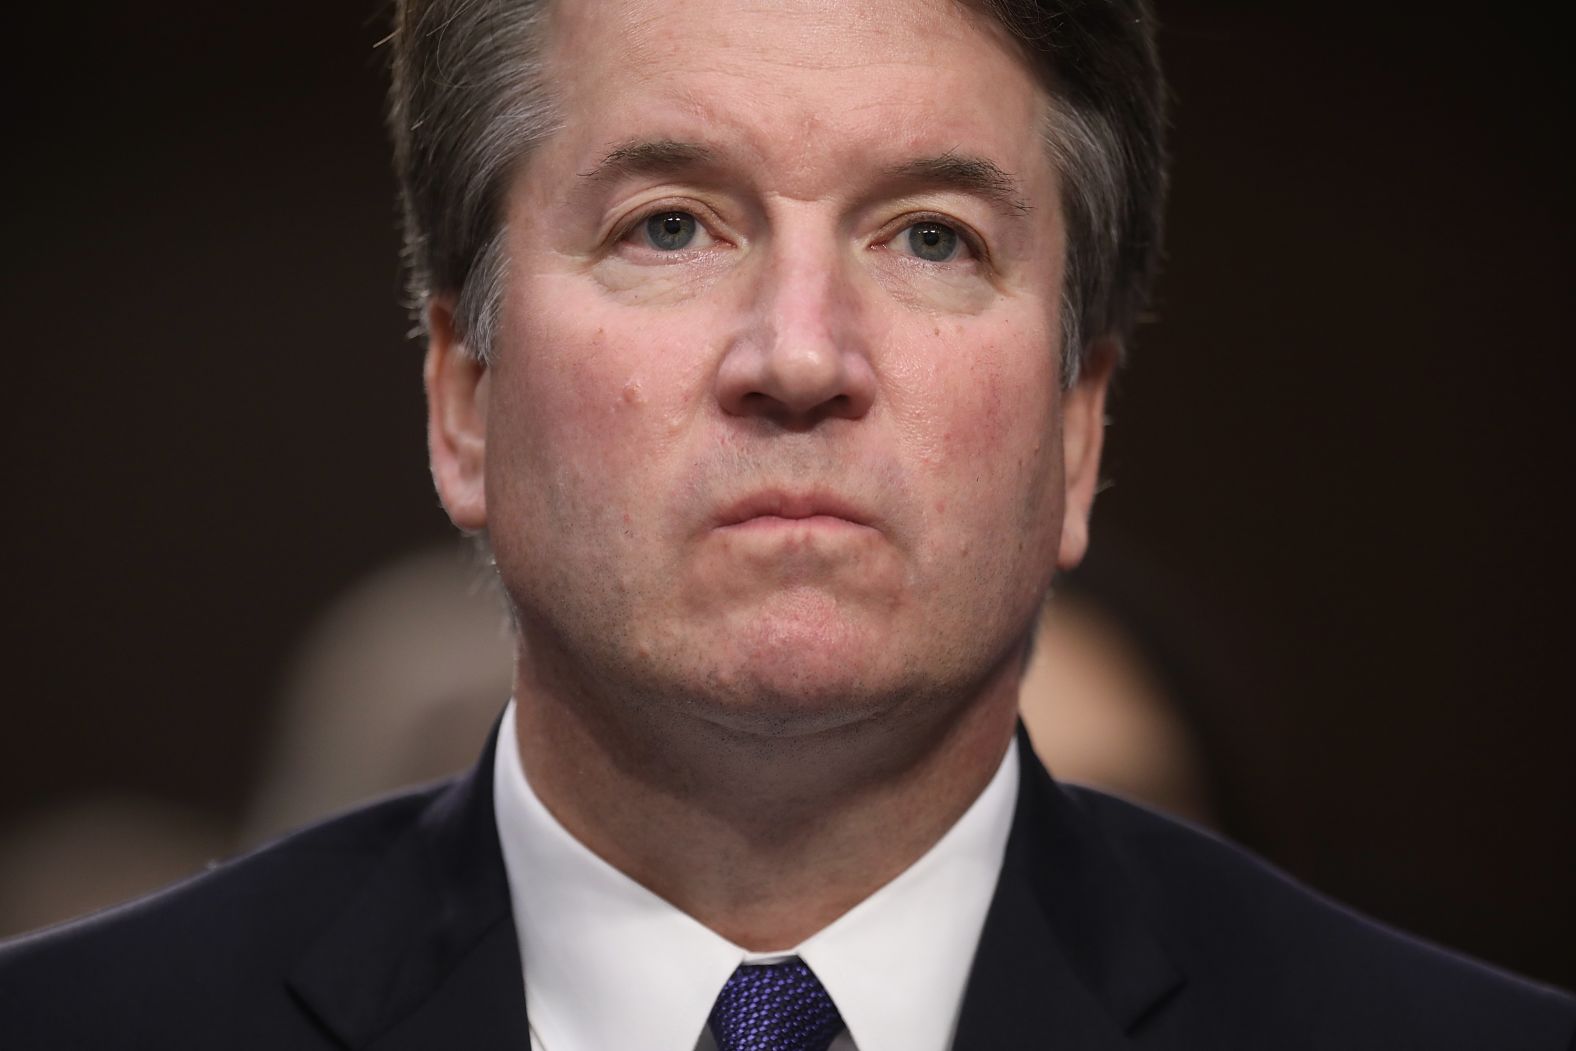 "A good judge must be an umpire -- a neutral and impartial arbiter who favors no litigant or policy," Kavanaugh said in his opening remarks. "I don't decide cases based on personal or policy preferences. I am not a pro-plaintiff or pro-defendant judge. I am not a pro-prosecution or pro-defense judge. I am a pro-law judge."